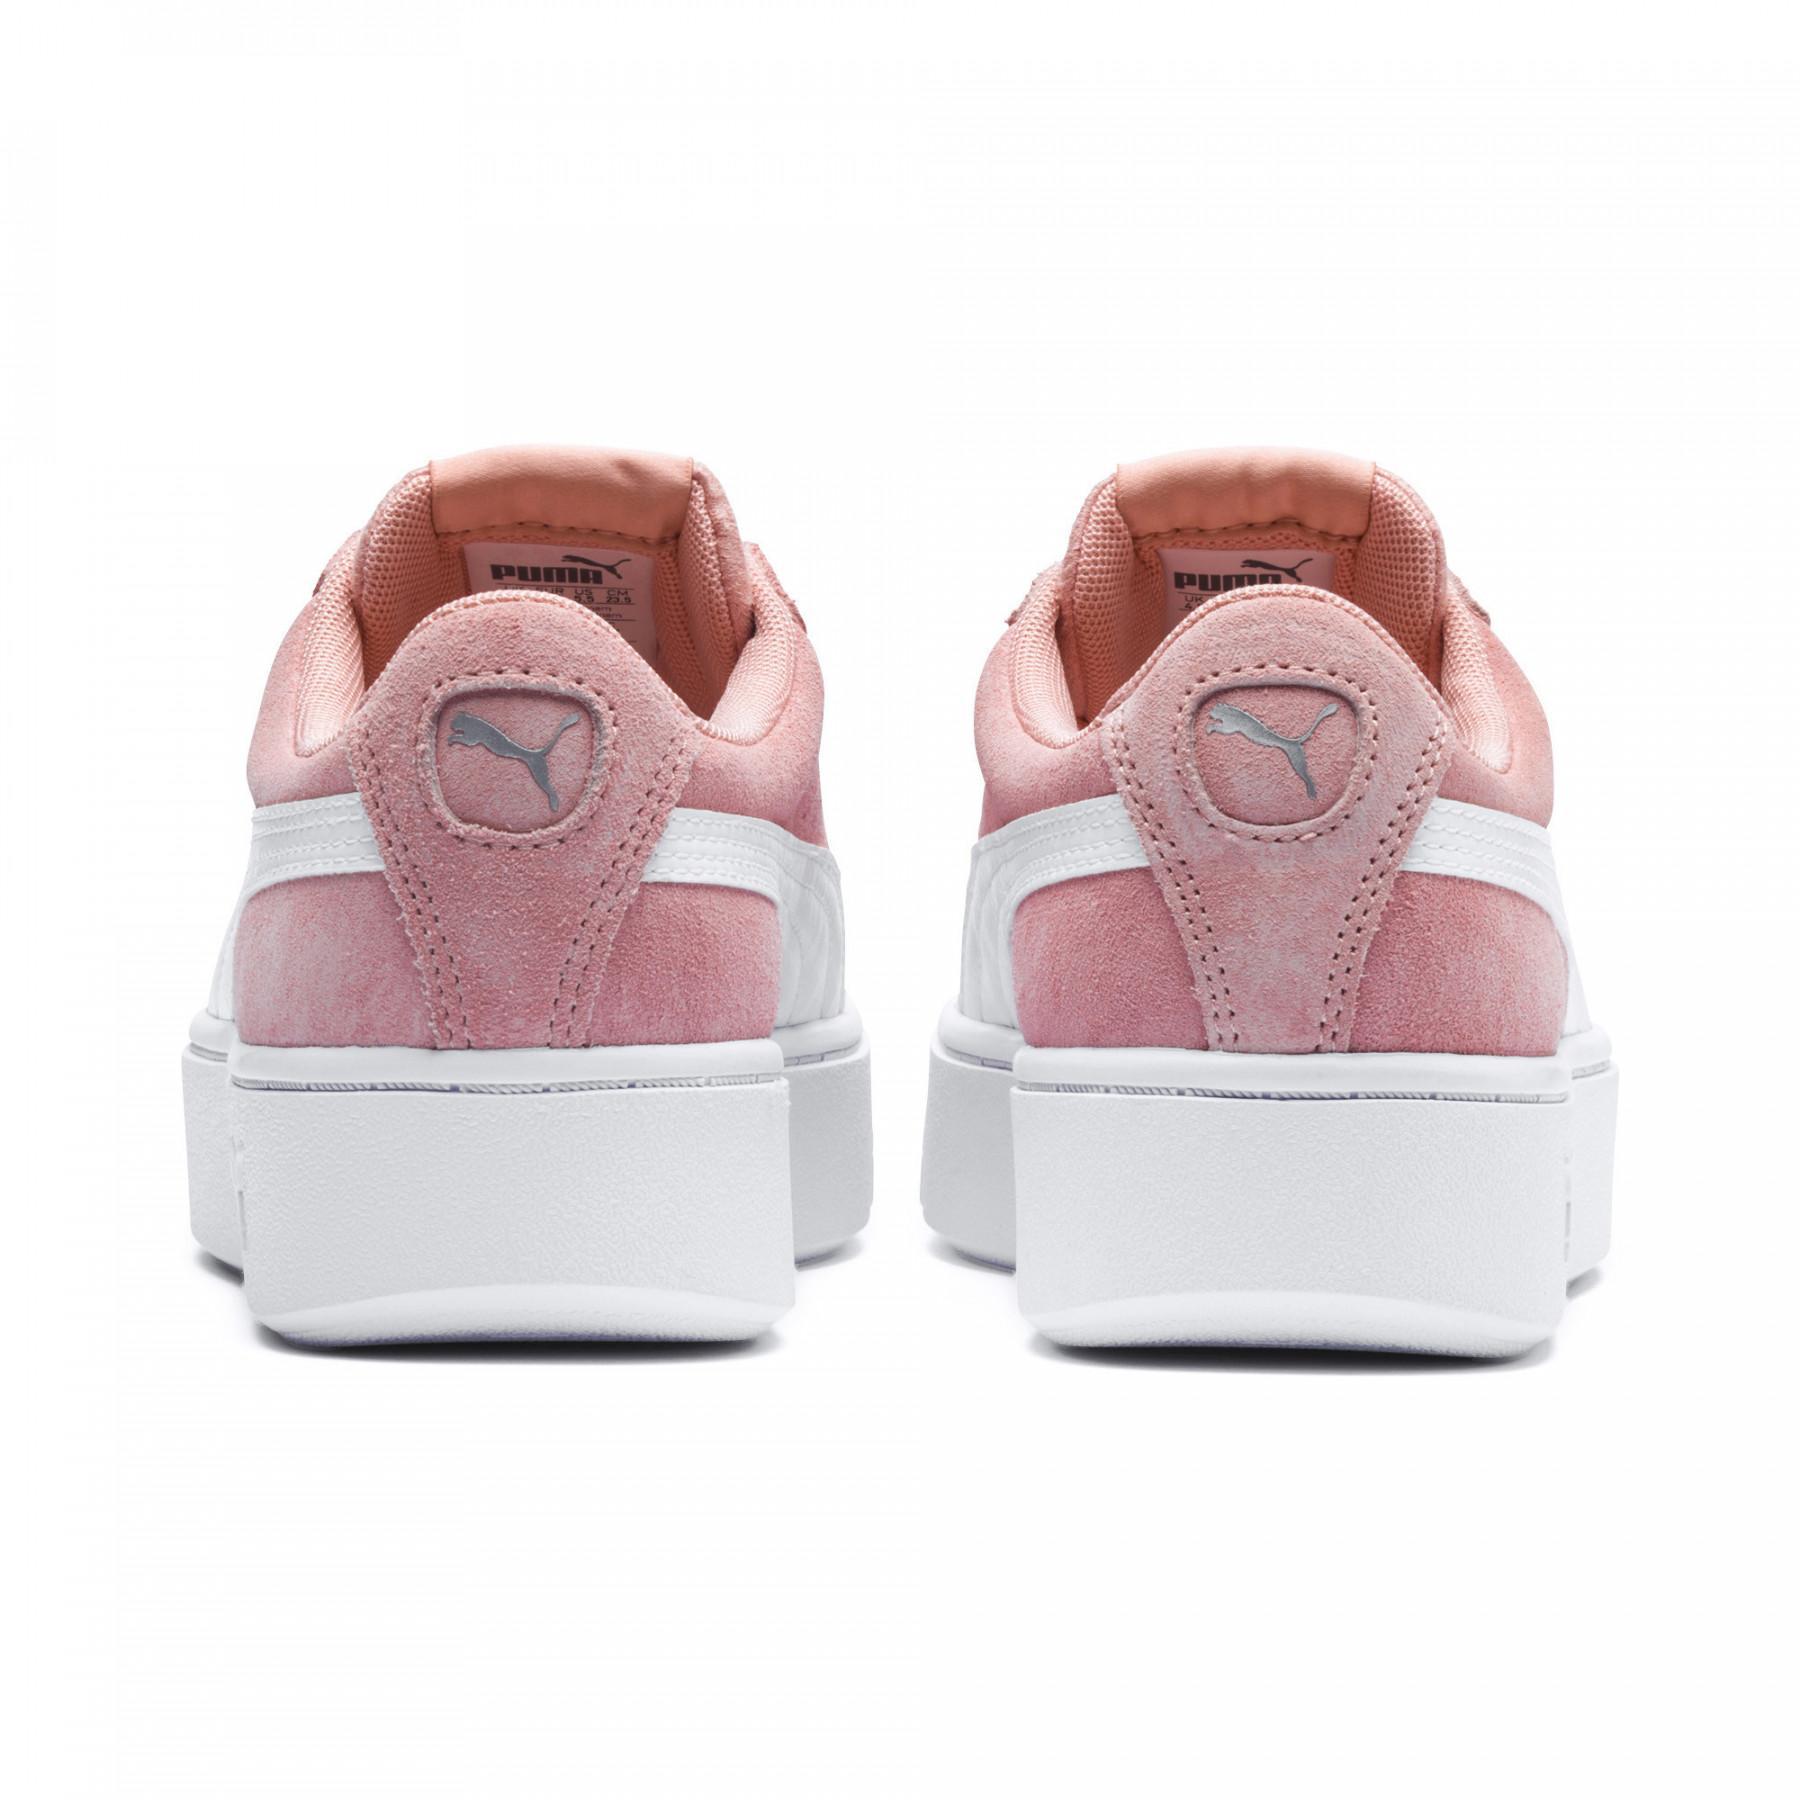 Women's sneakers Puma Vikky Stacked